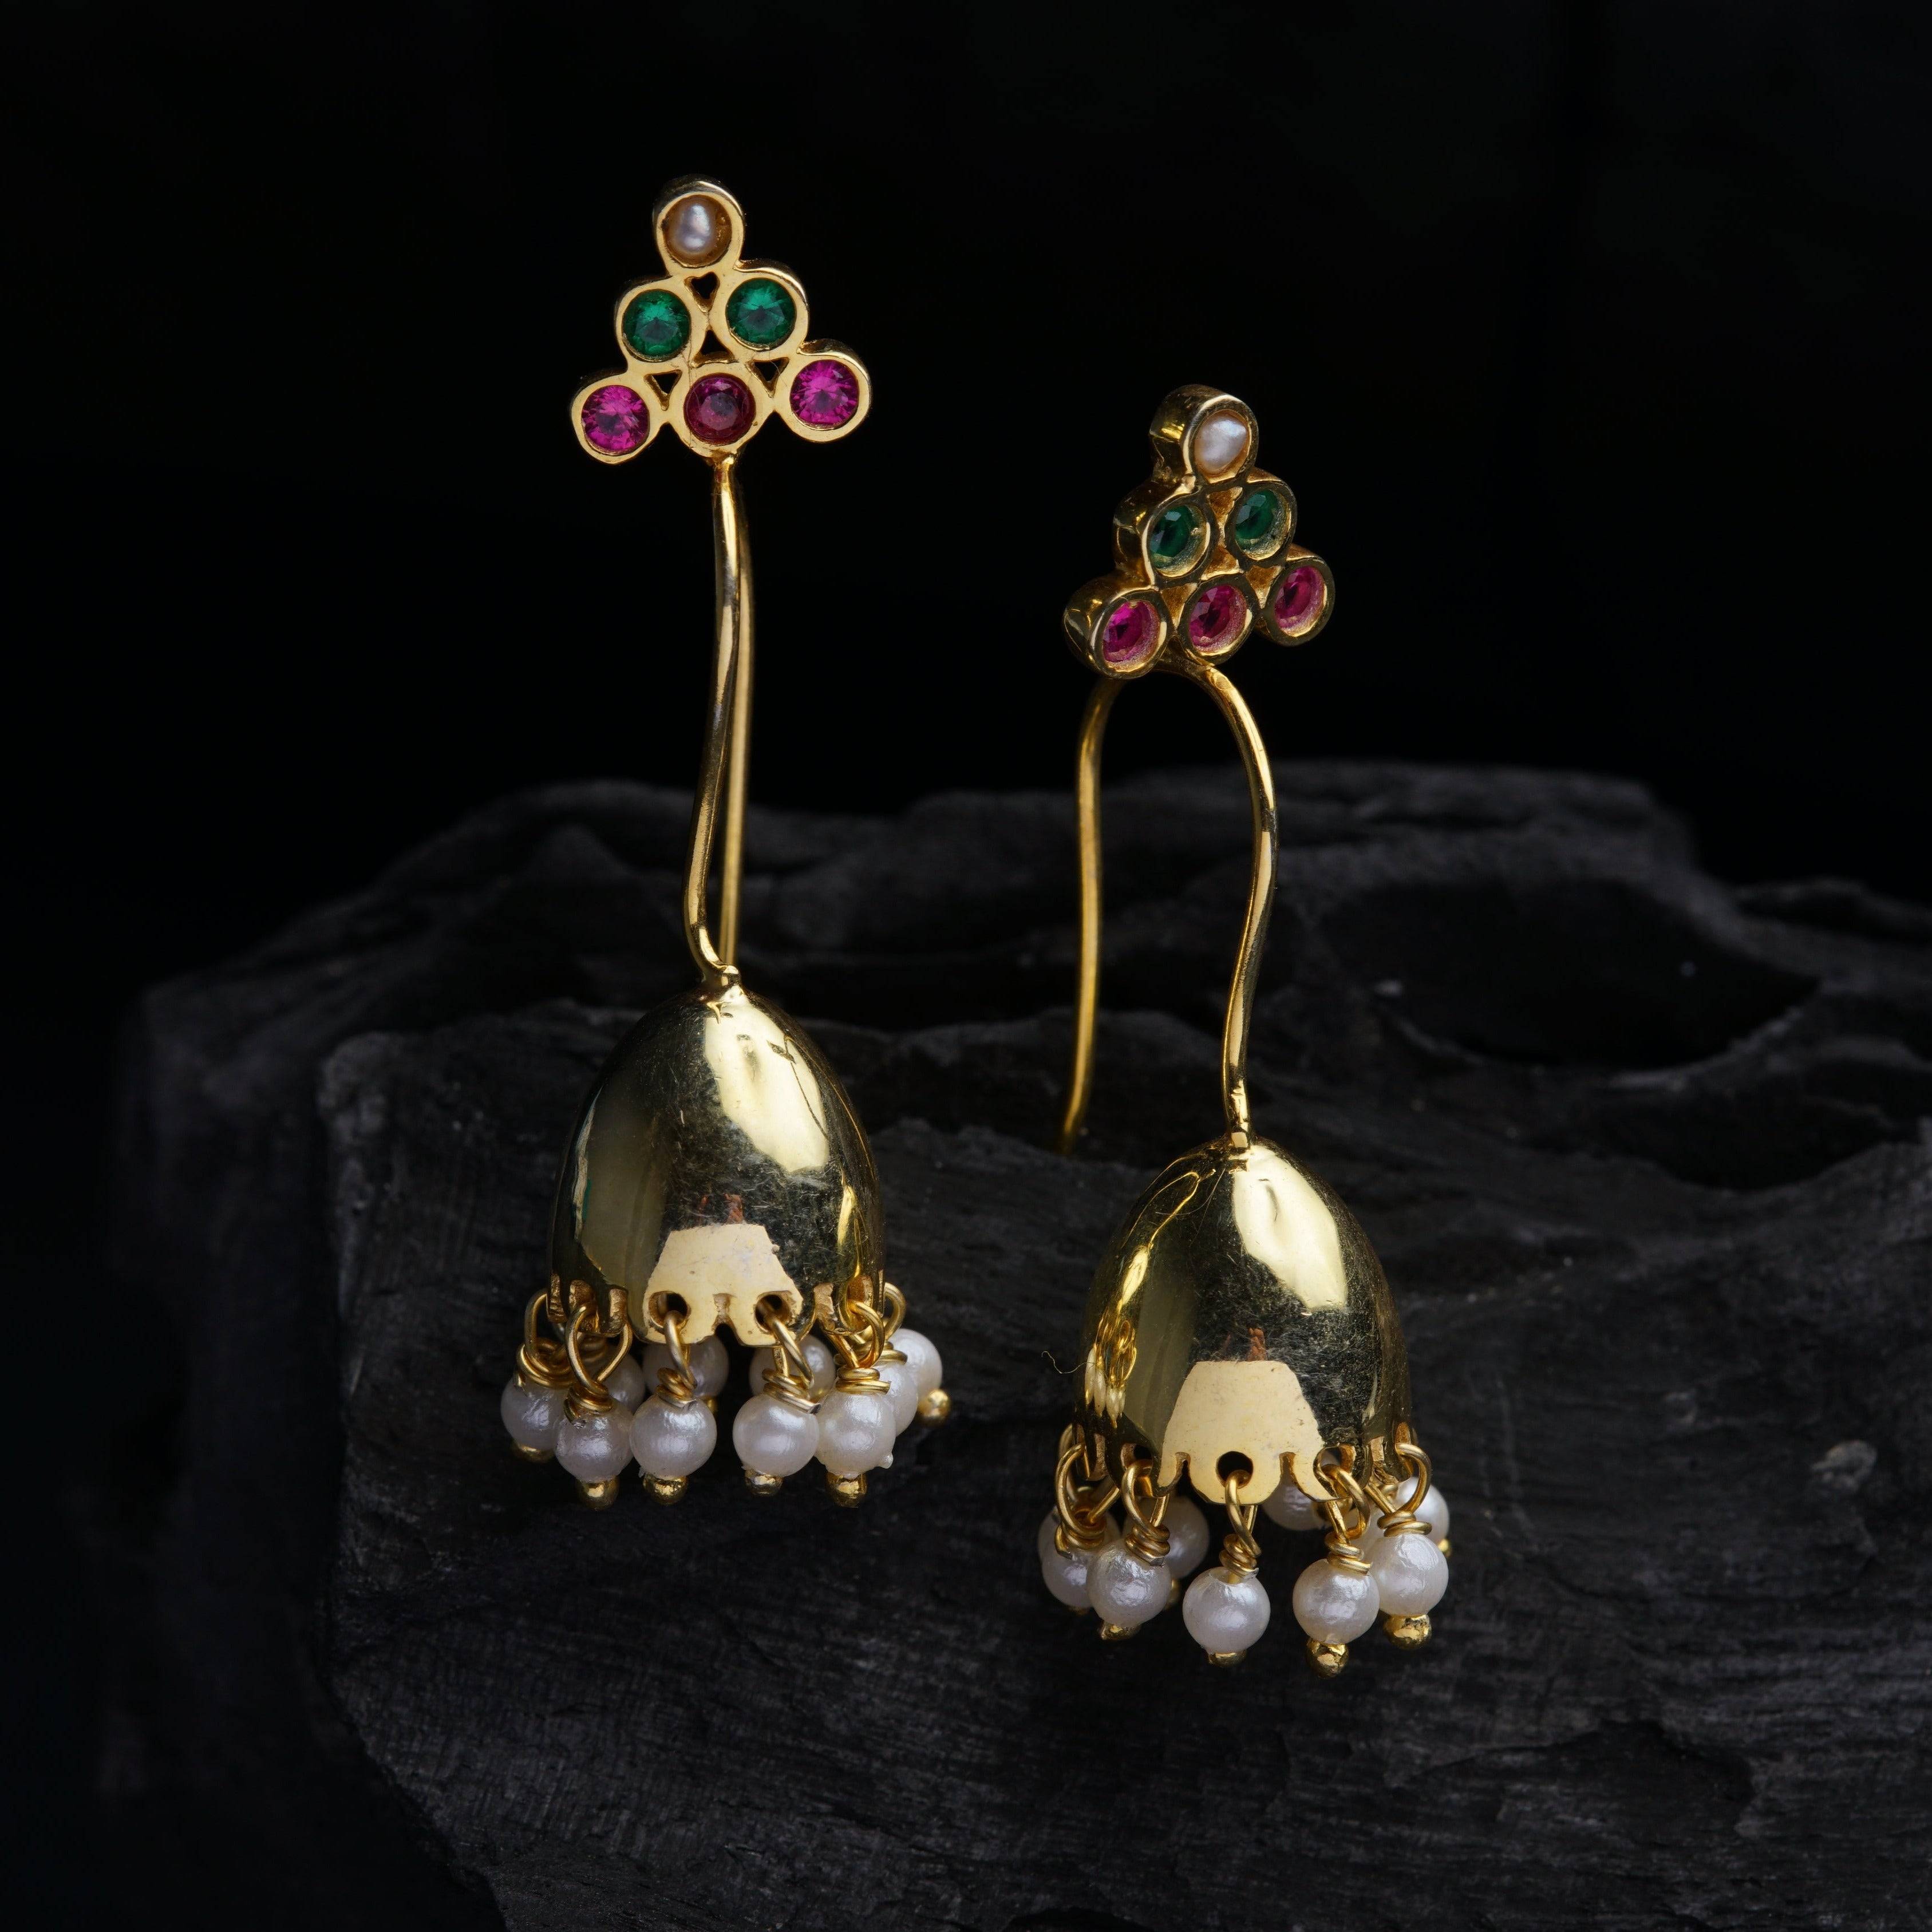 a pair of gold earrings with multi - colored stones